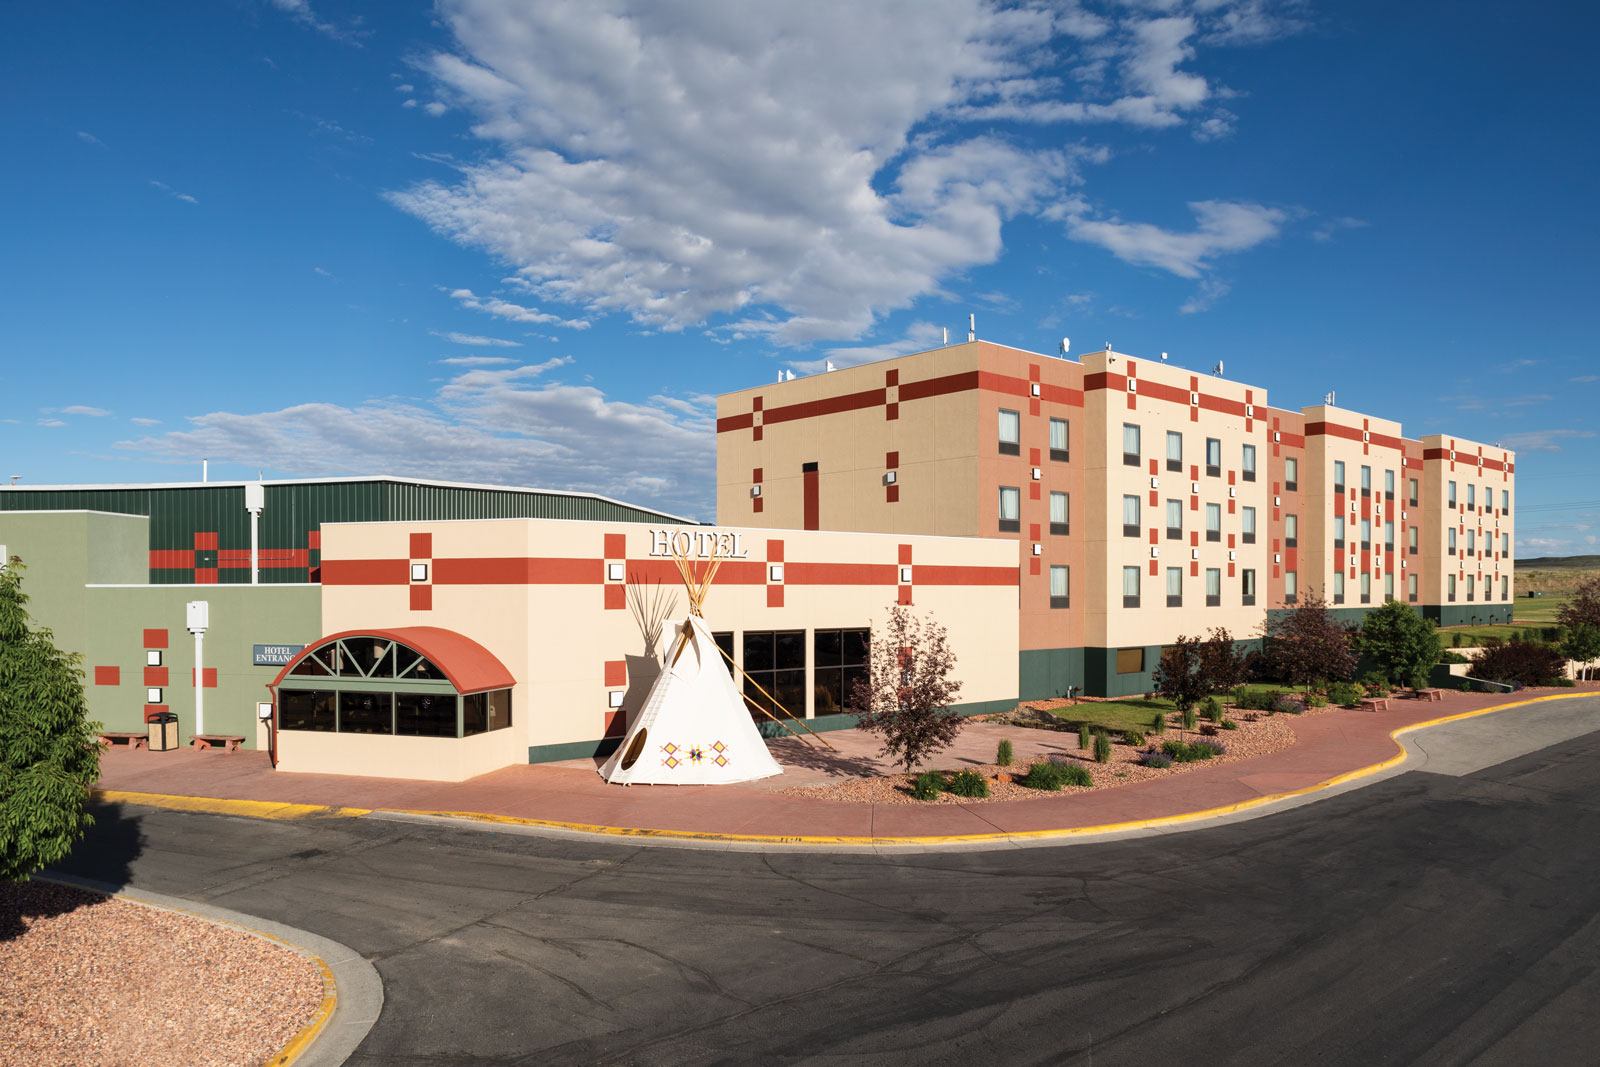 wind river casino human resources phone number